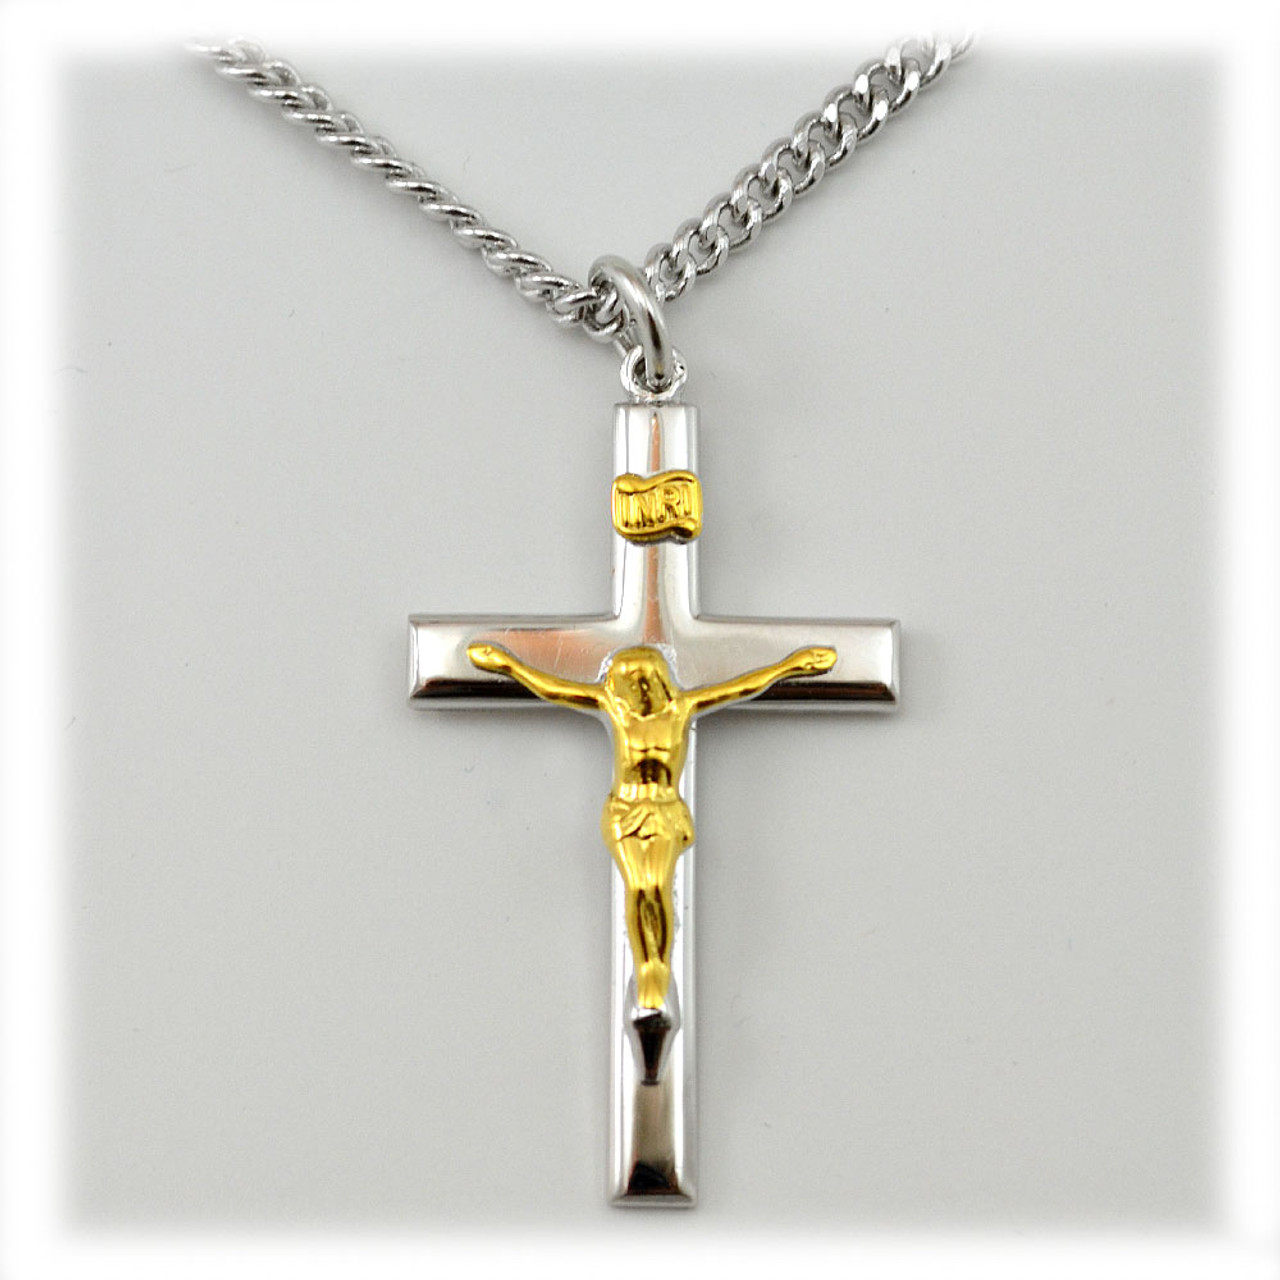 Peoples Stainless Steel and 10K Gold Large Crucifix Pendant - 24.0